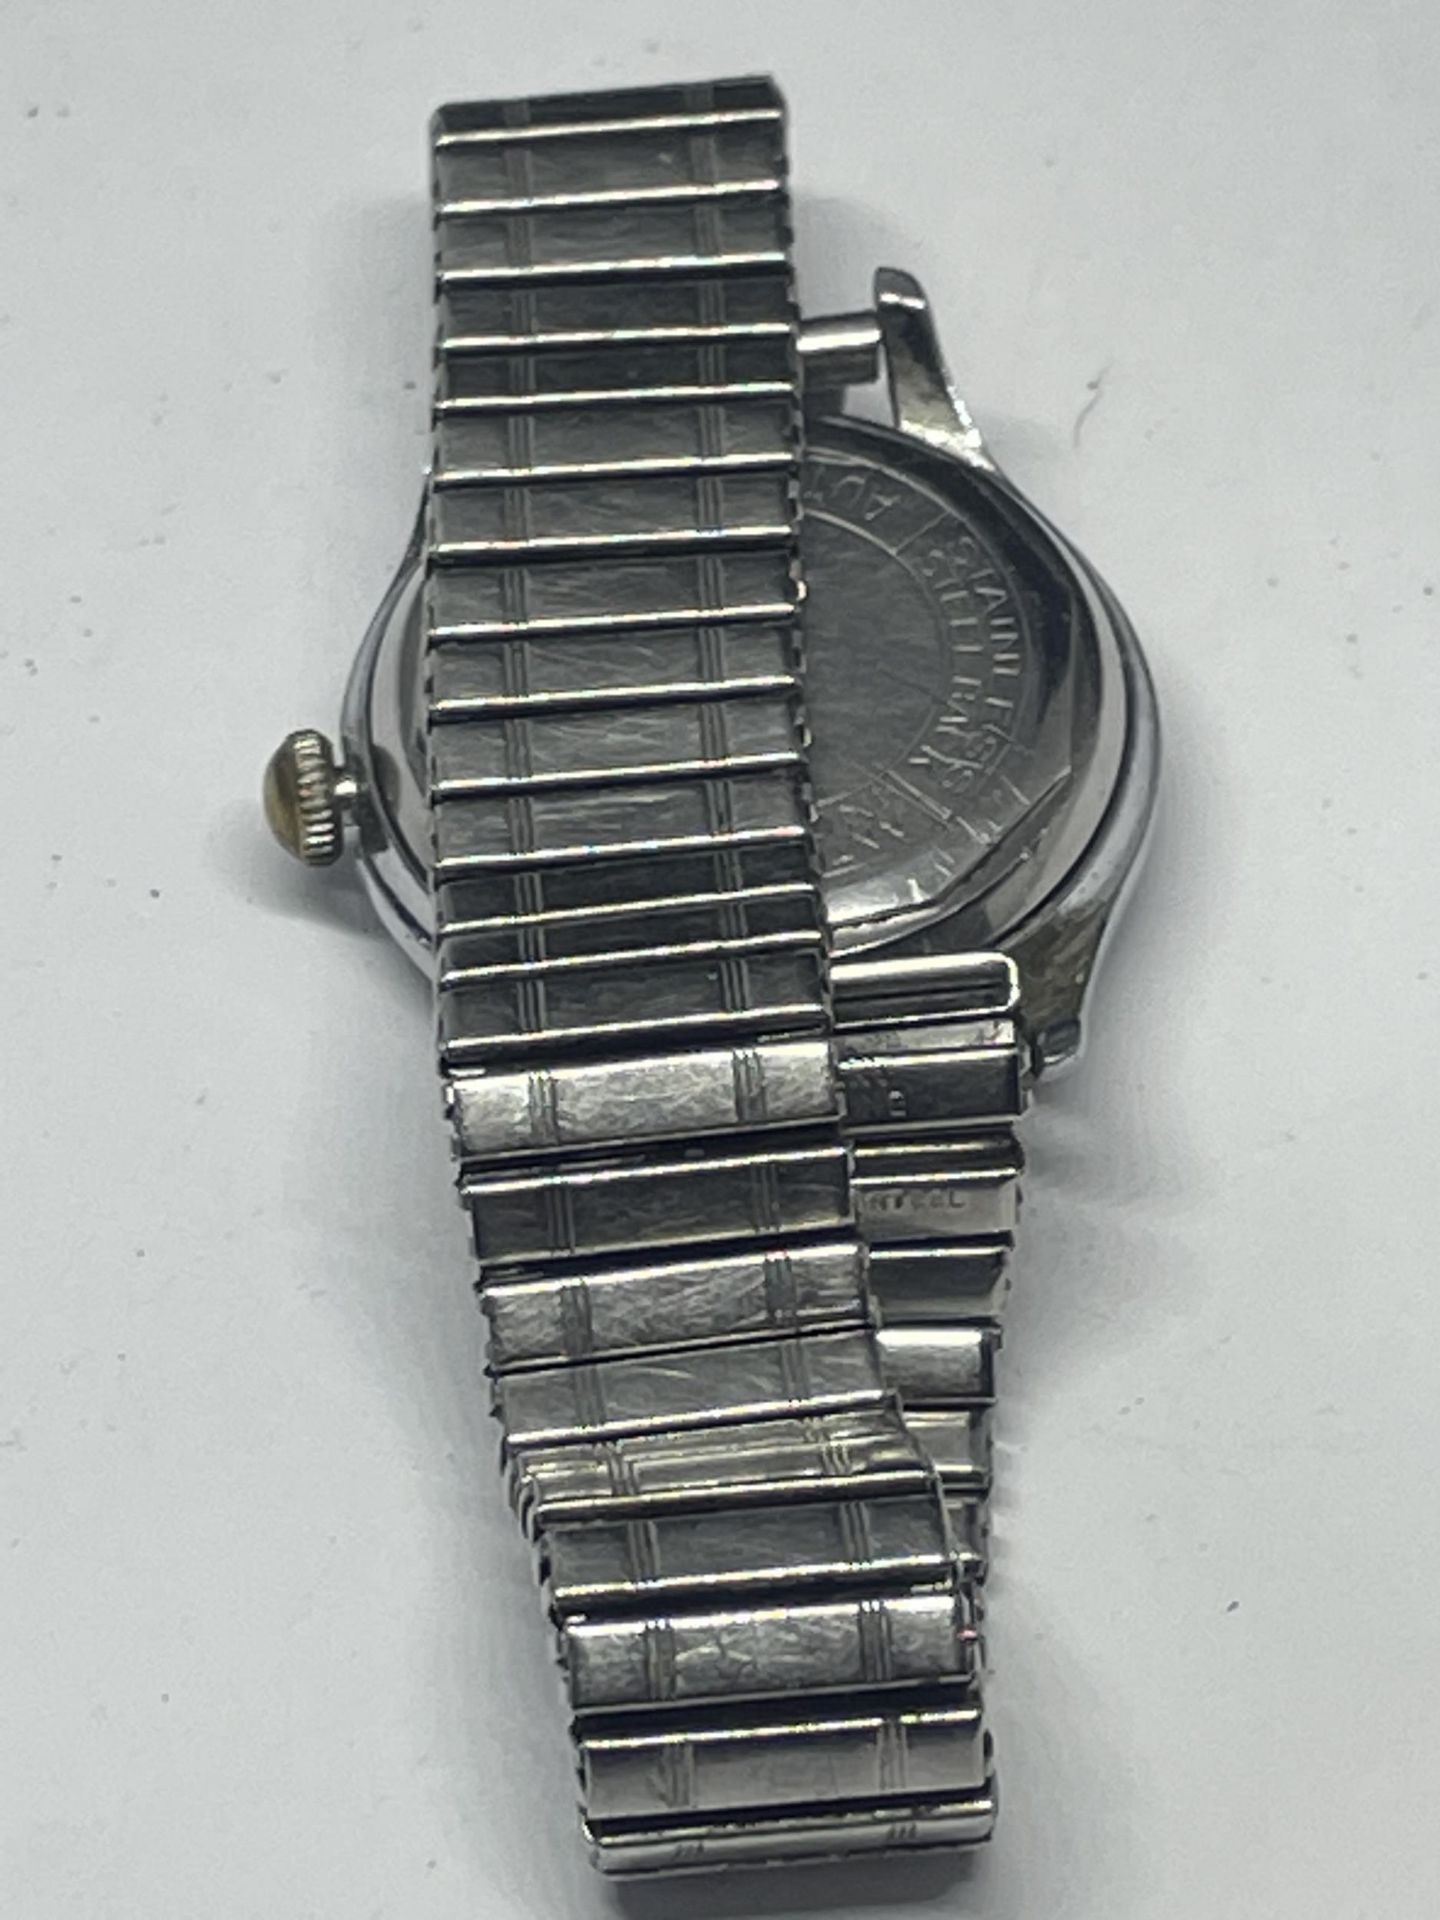 A MONFORT SUPER AUTOMATIC GENTS WRIST WATCH - Image 3 of 3